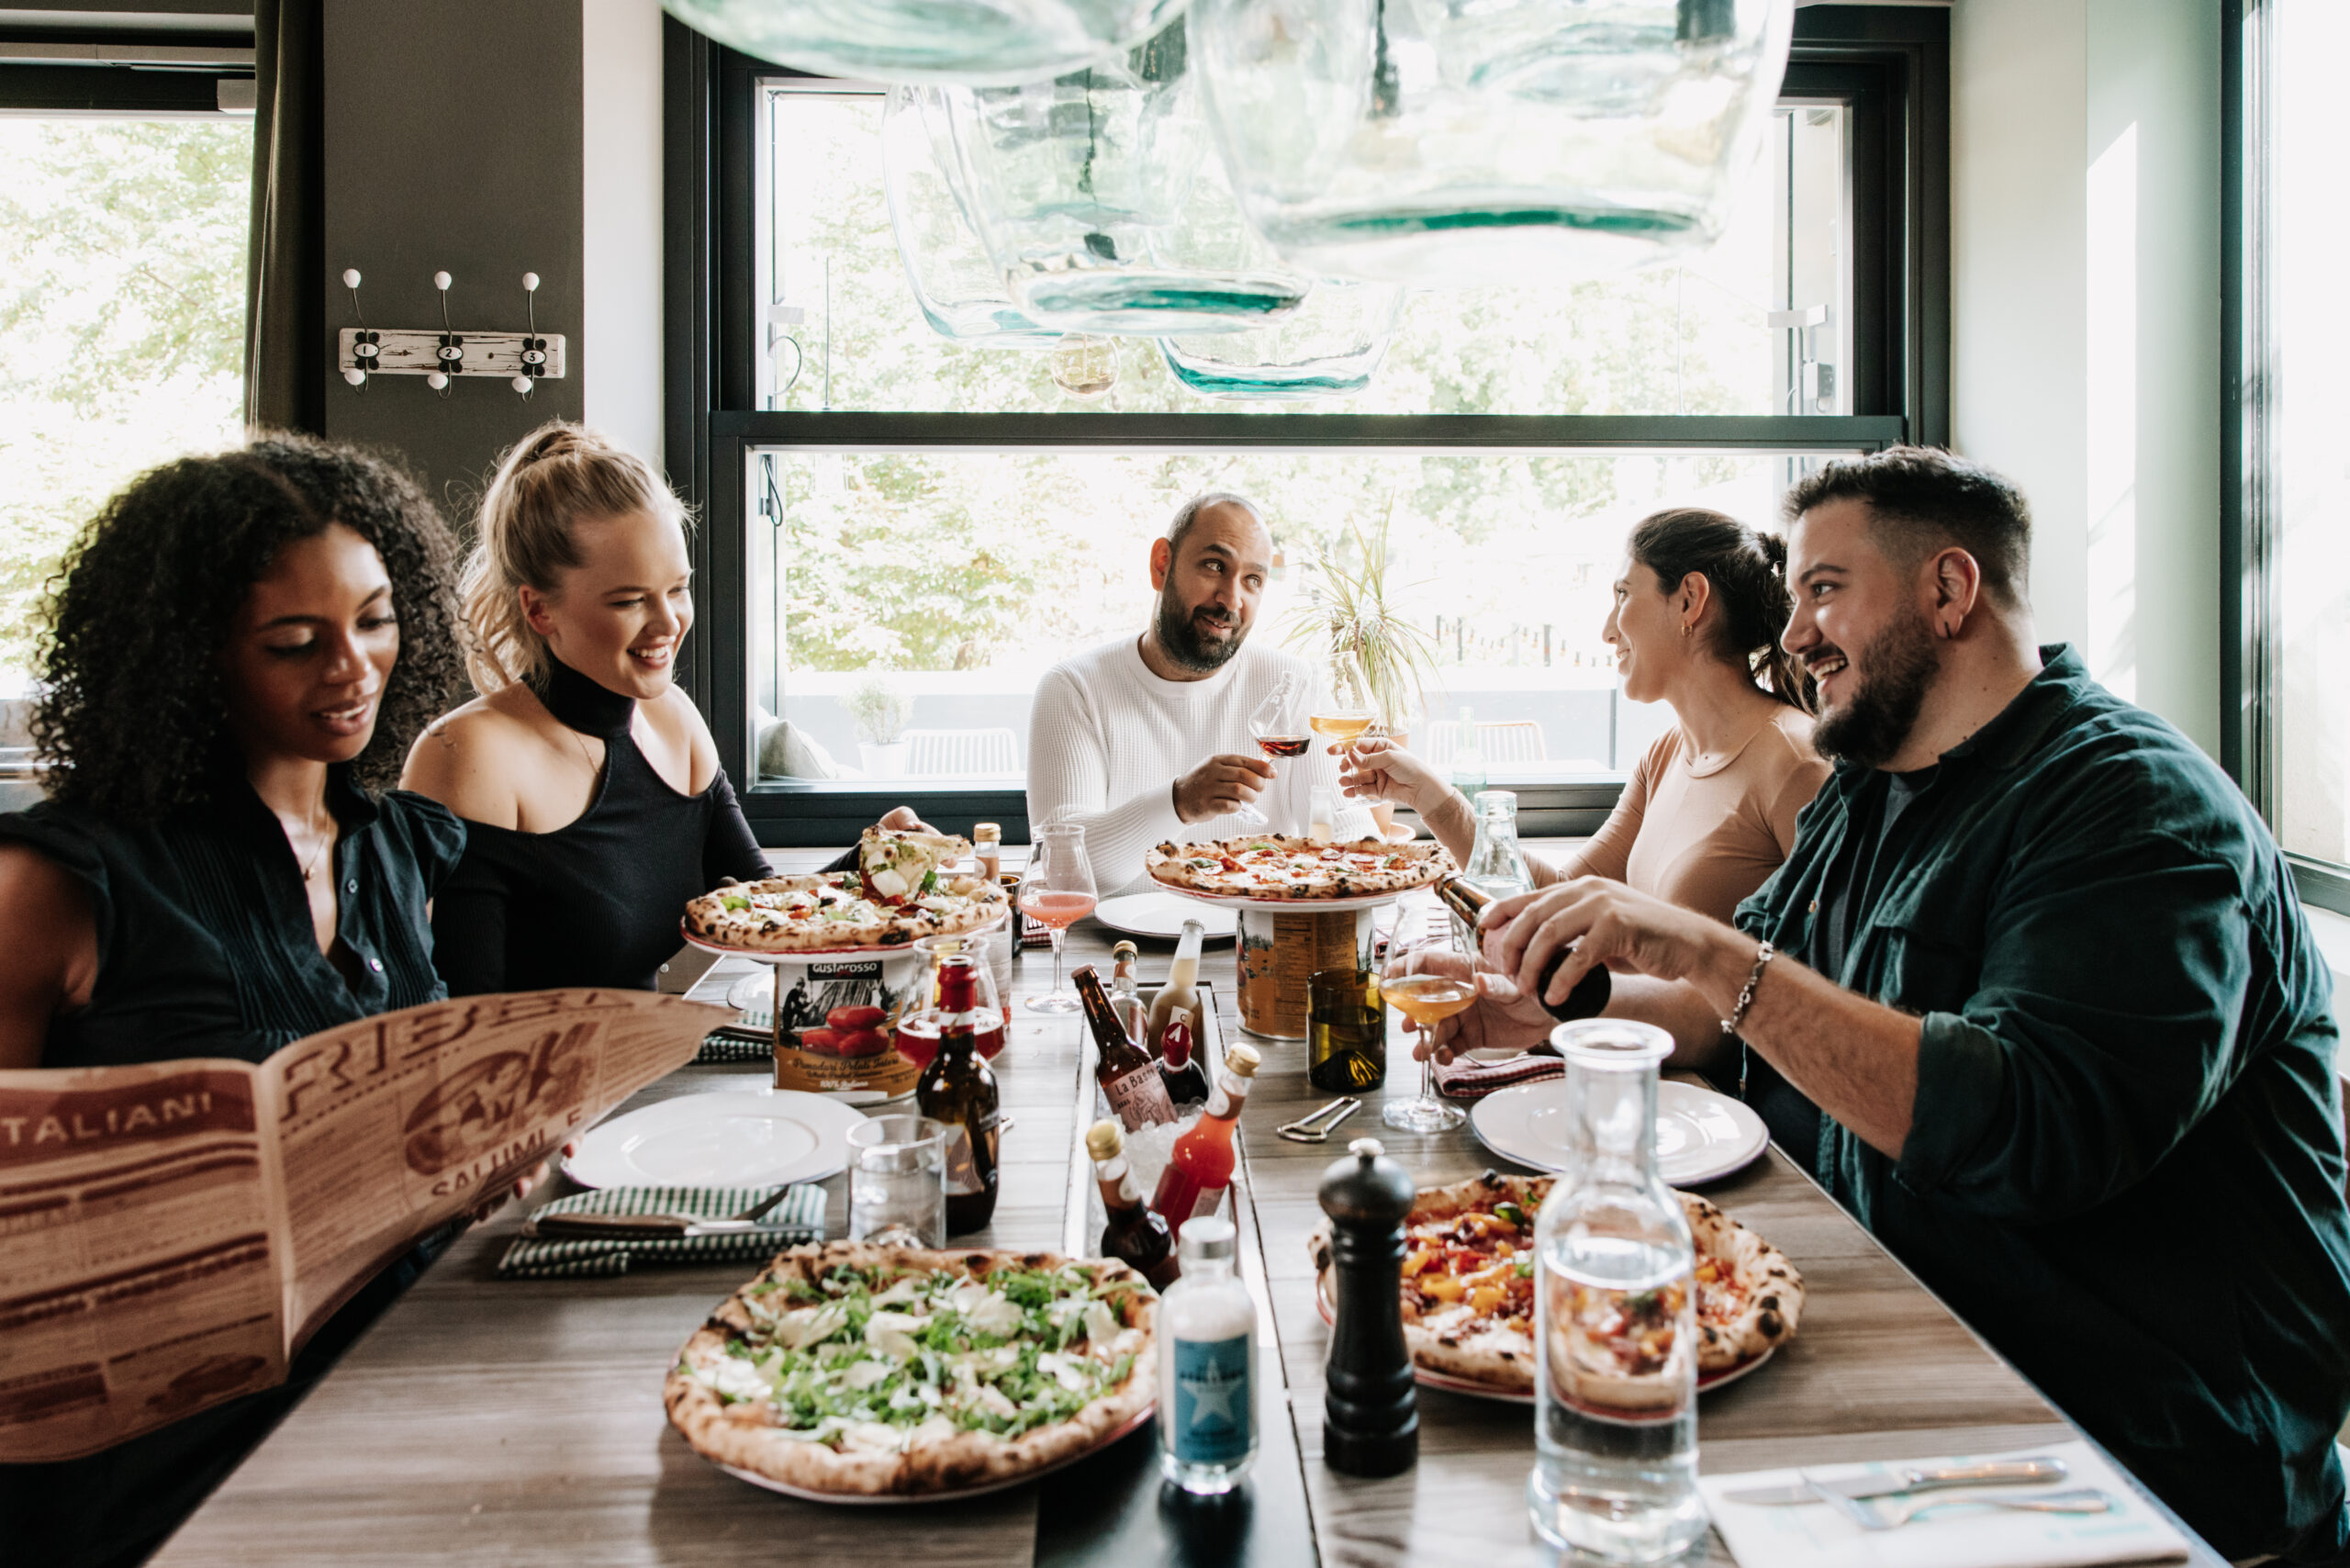 A group of 5 people is enjoying lunch on a large table, there are several different kinds of pizza as well as dirnks on the table